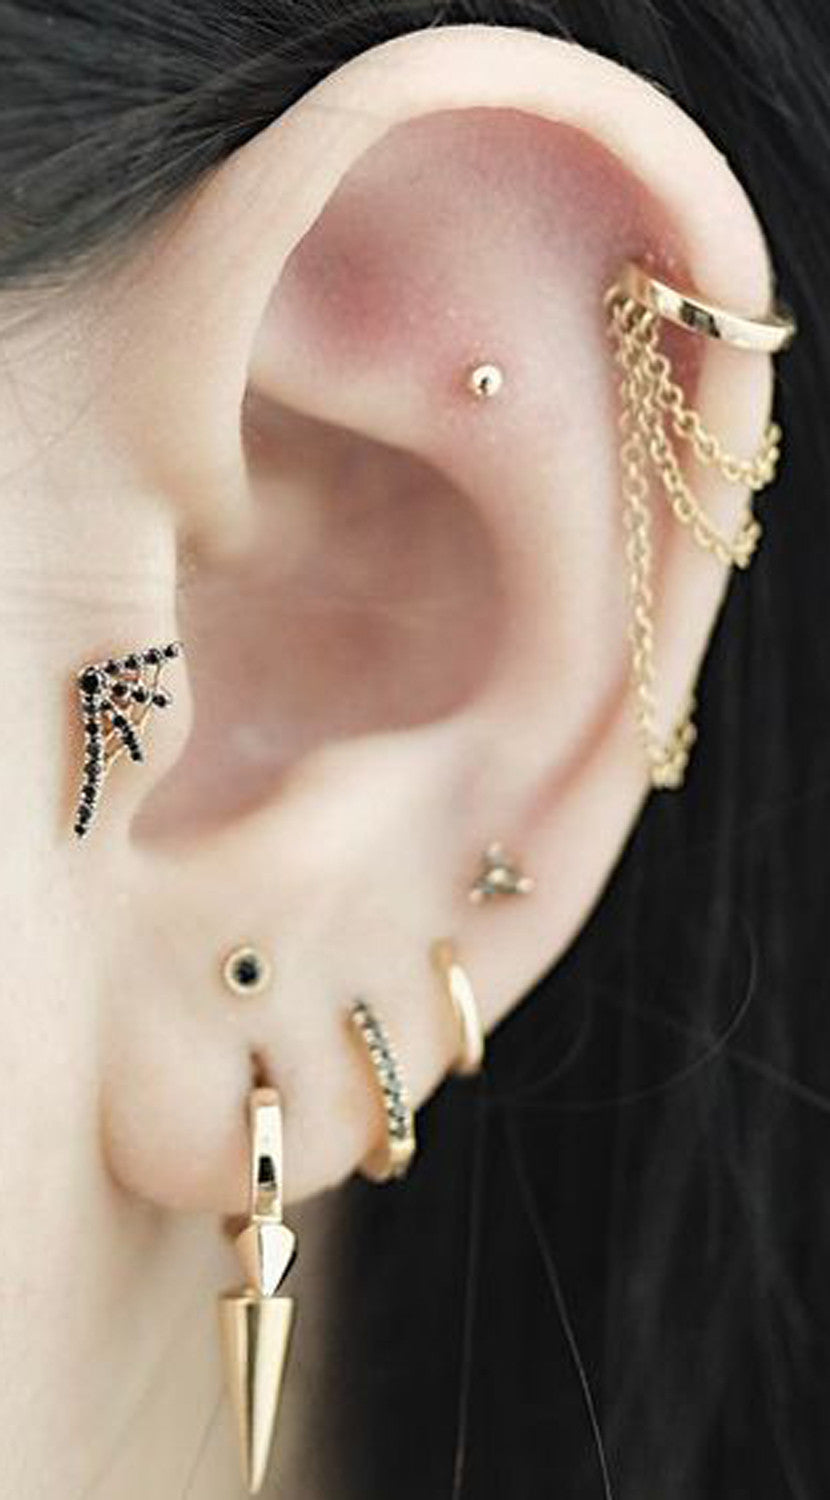 Unique Cool Ear Piercing Ideas at MyBodiArt.com - Cartilage Helix Hoop Rings Tragus Stud 